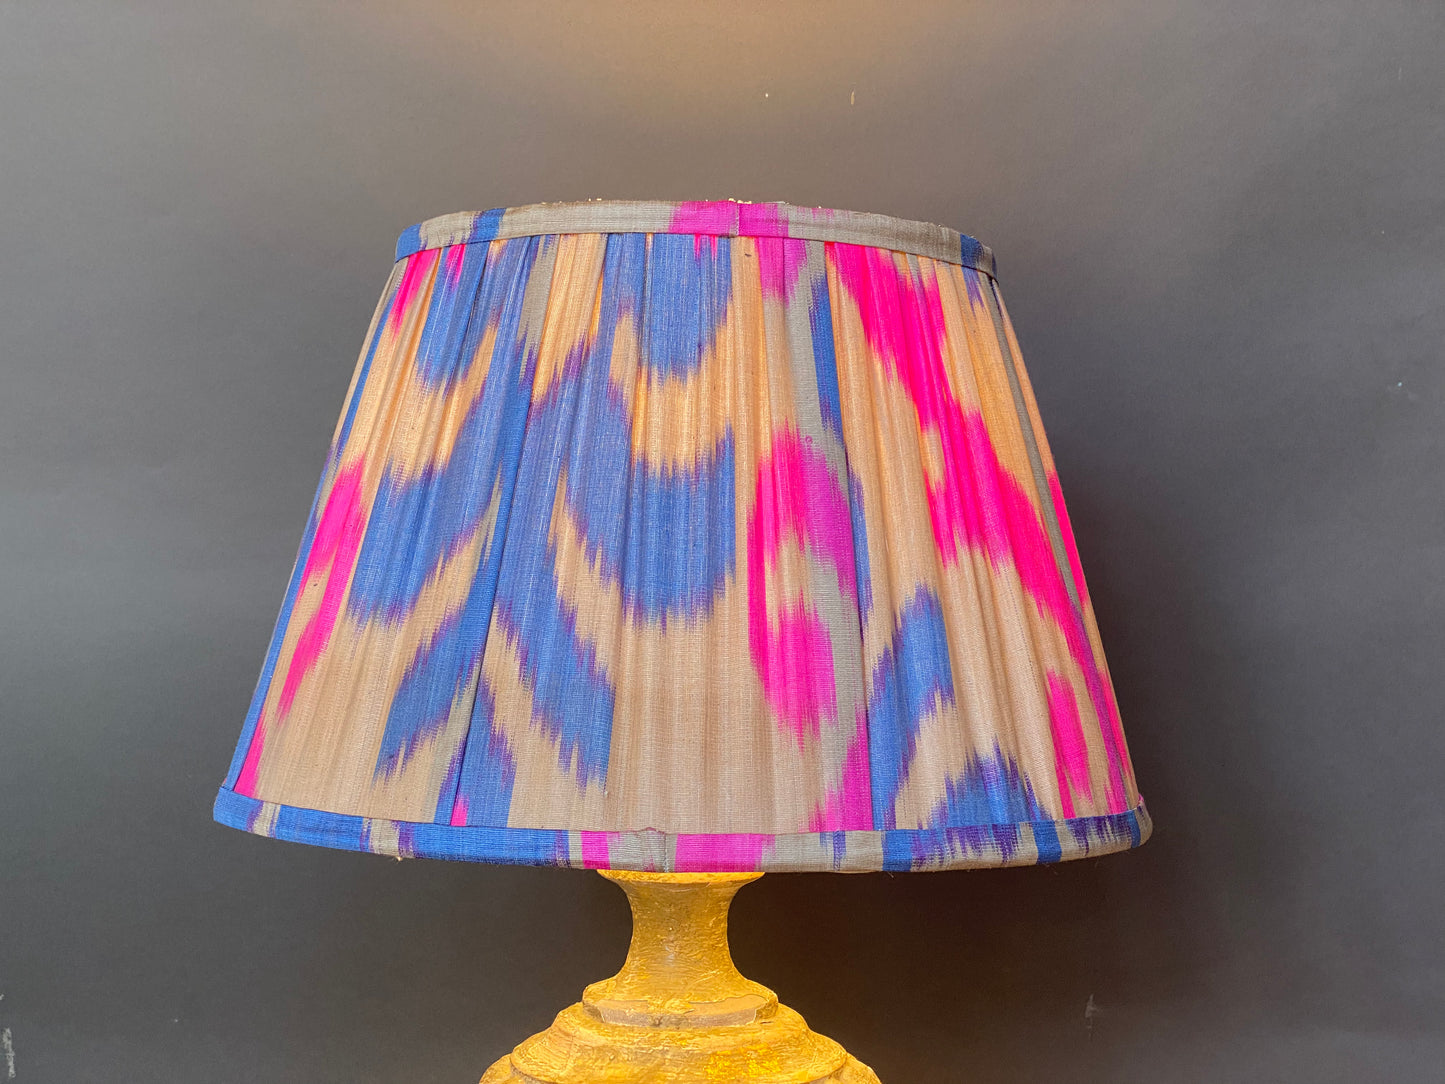 Bright pink and blue ikat silk lampshade with light bulb on